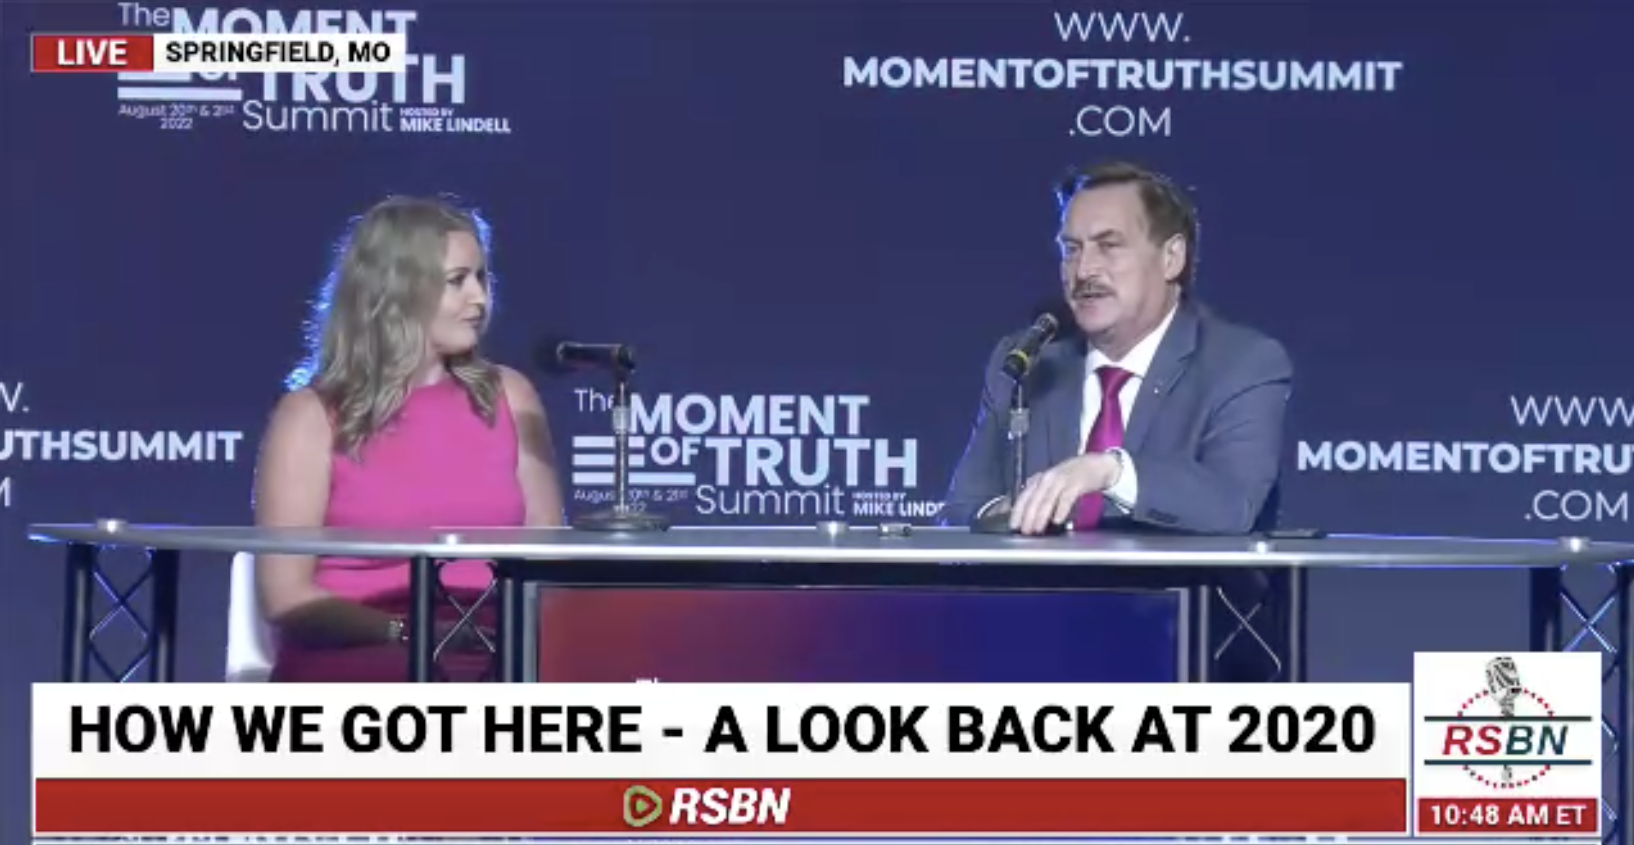 LIVE: The Moment Of Truth Summit By Mike Lindell In Springfield MO 8-20-2022 - DAY ONE